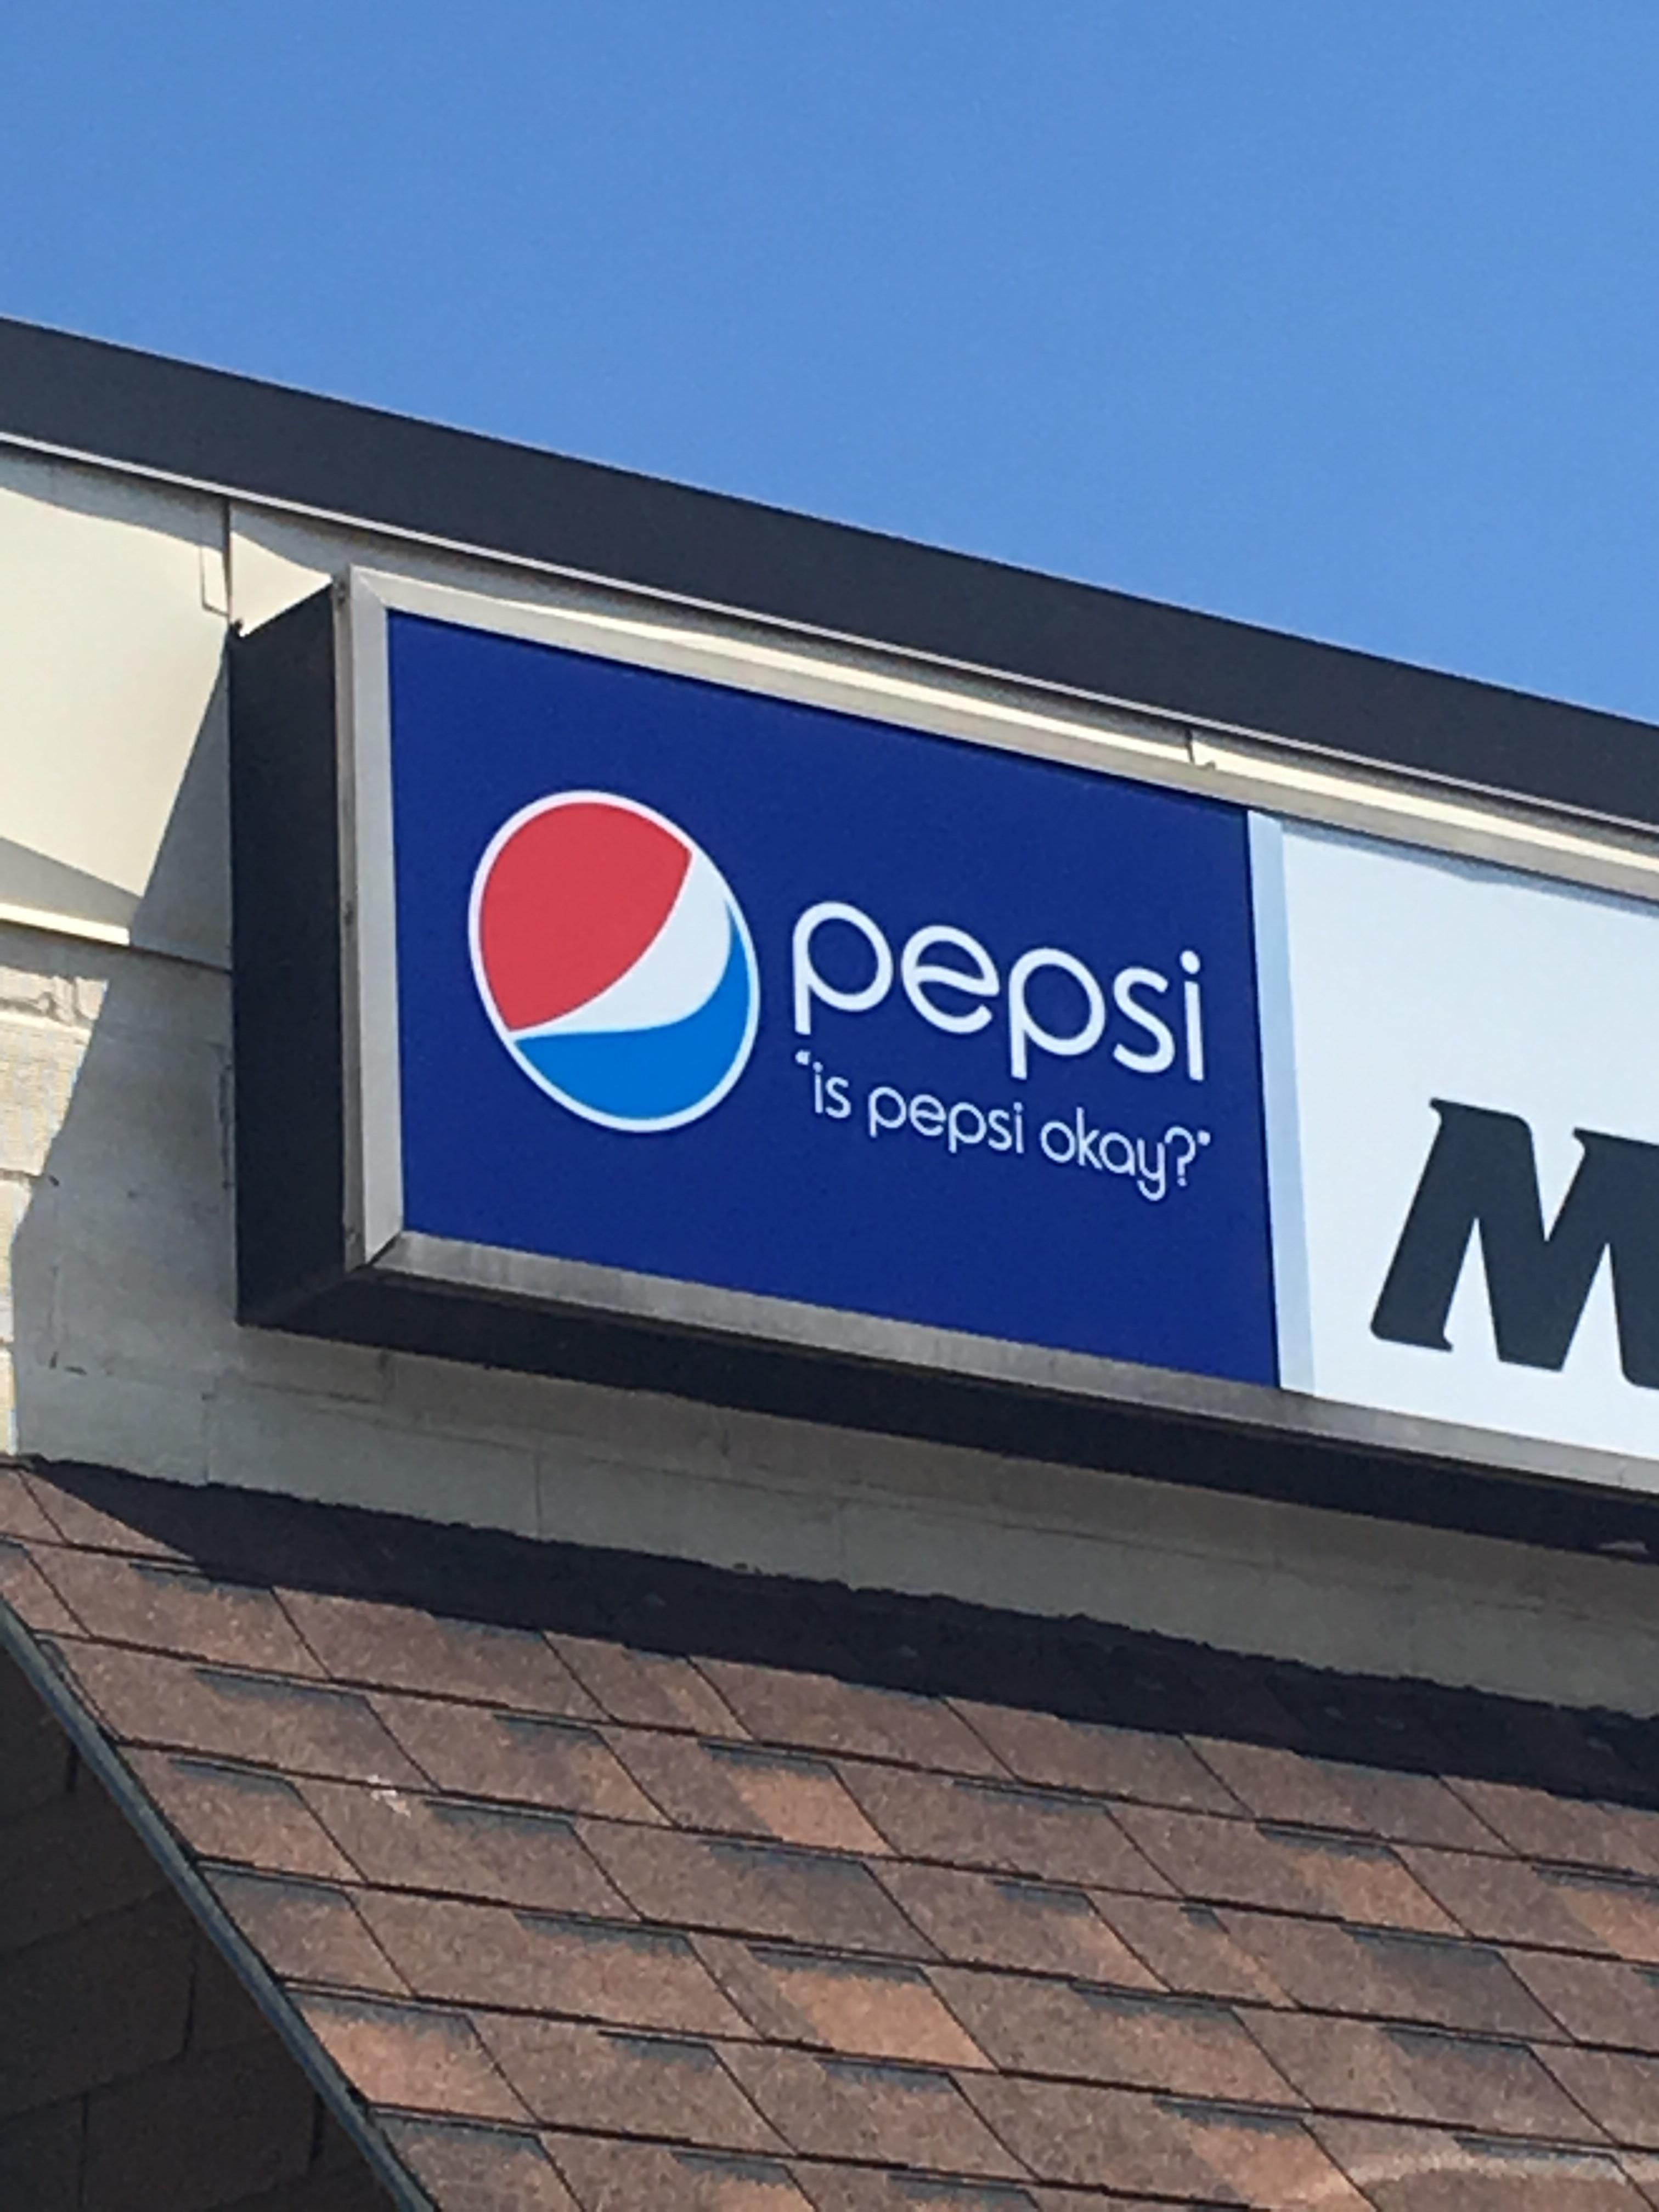 This Pepsi sign on a convenience store